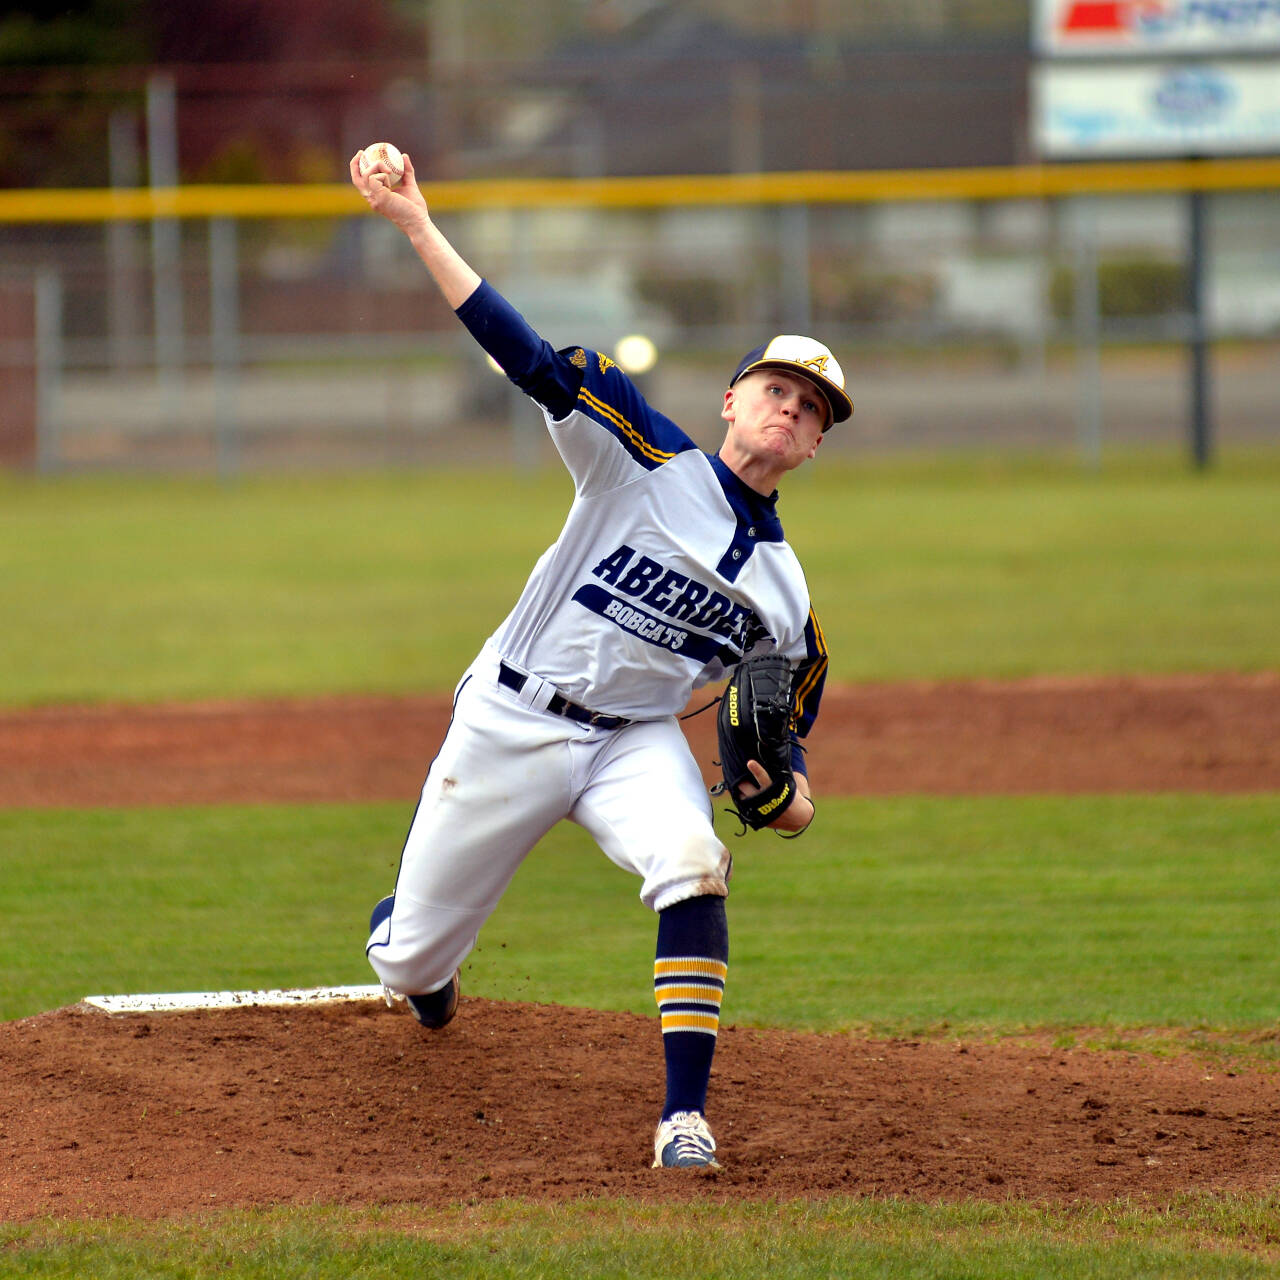 RYAN SPARKS | THE DAILY WORLD Aberdeen pitcher Hunter Eisele allowed four hits and struck out eight in leading the Bobcats to a 7-1 victory over Rochester on Thursday in Aberdeen.